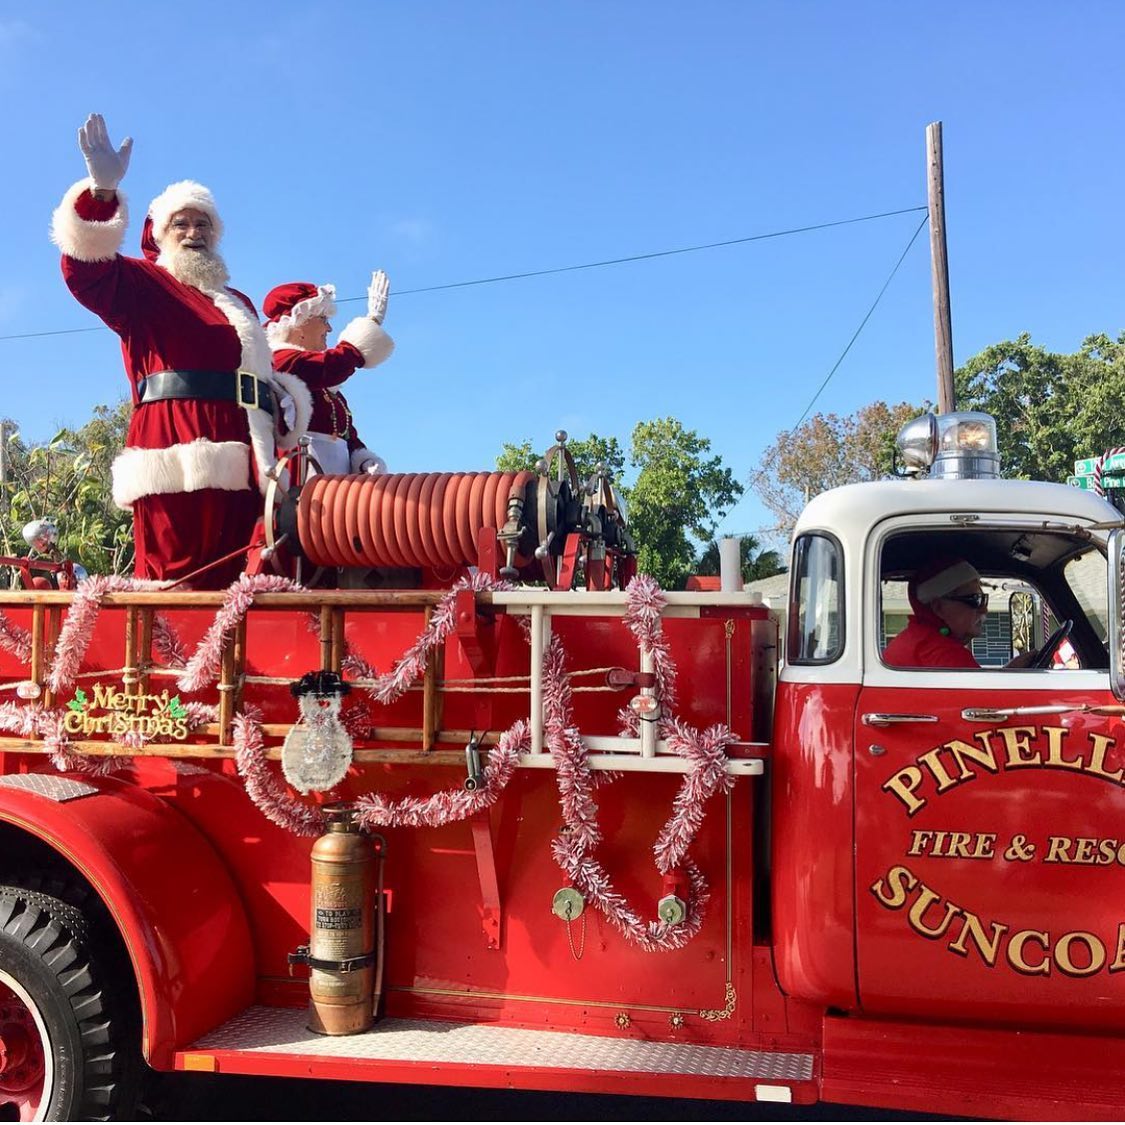 Santa and his wife ride on Pinelle Fire and rescue truck in a Christmas parade